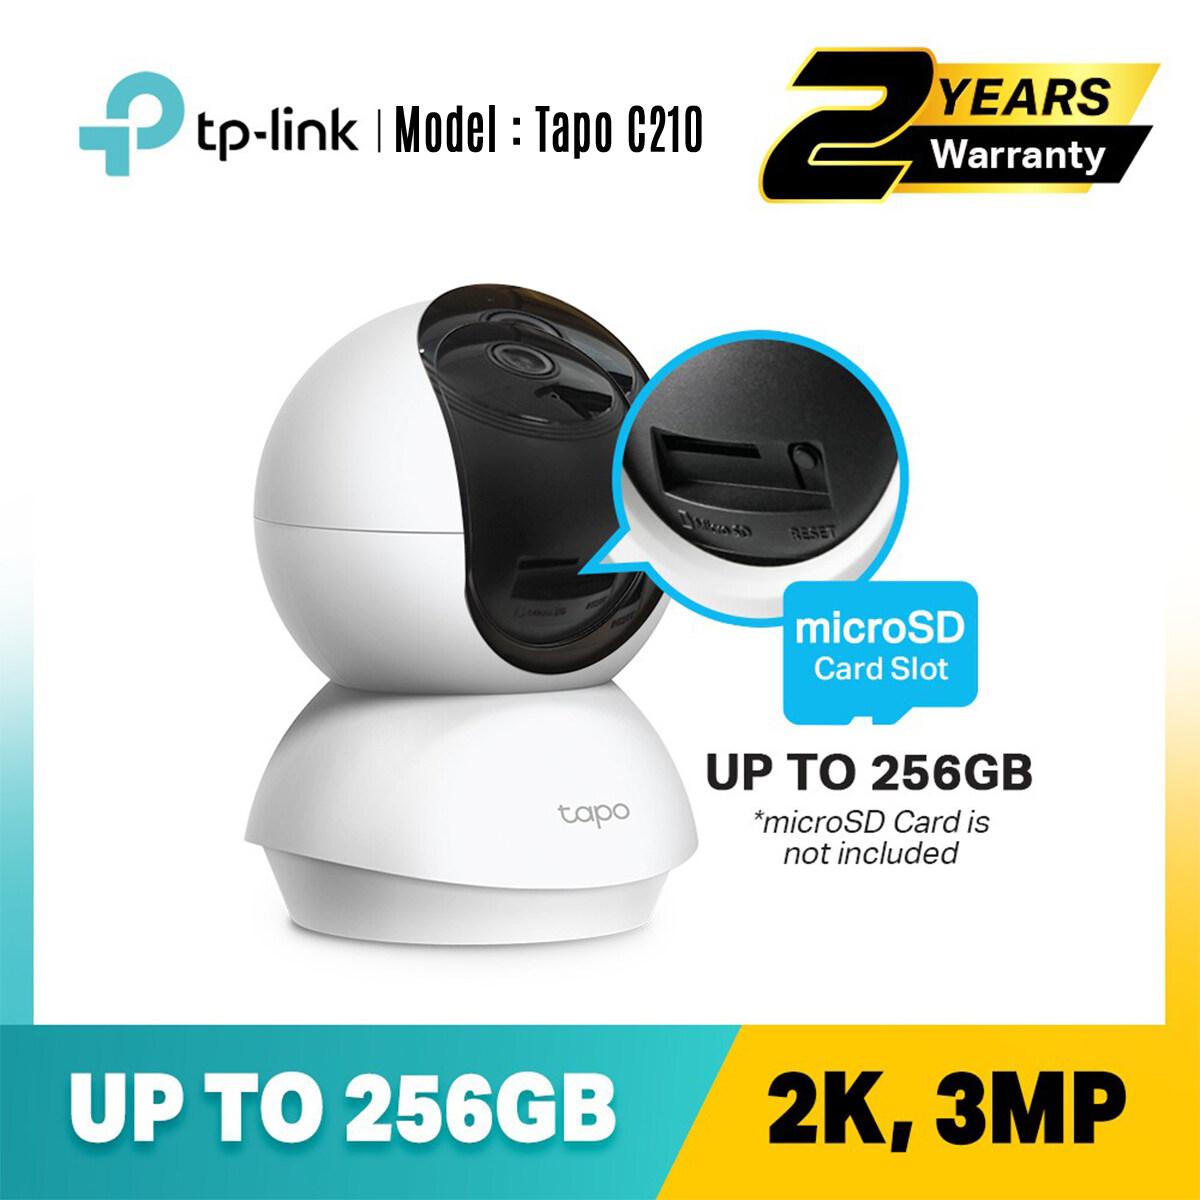 TP-Link TC70 - Pan Tilt Home PTZ 1080HD Full HD CCTV with Amazon Safety CLOUD/Sirim Certification WIFI Camera (C210)